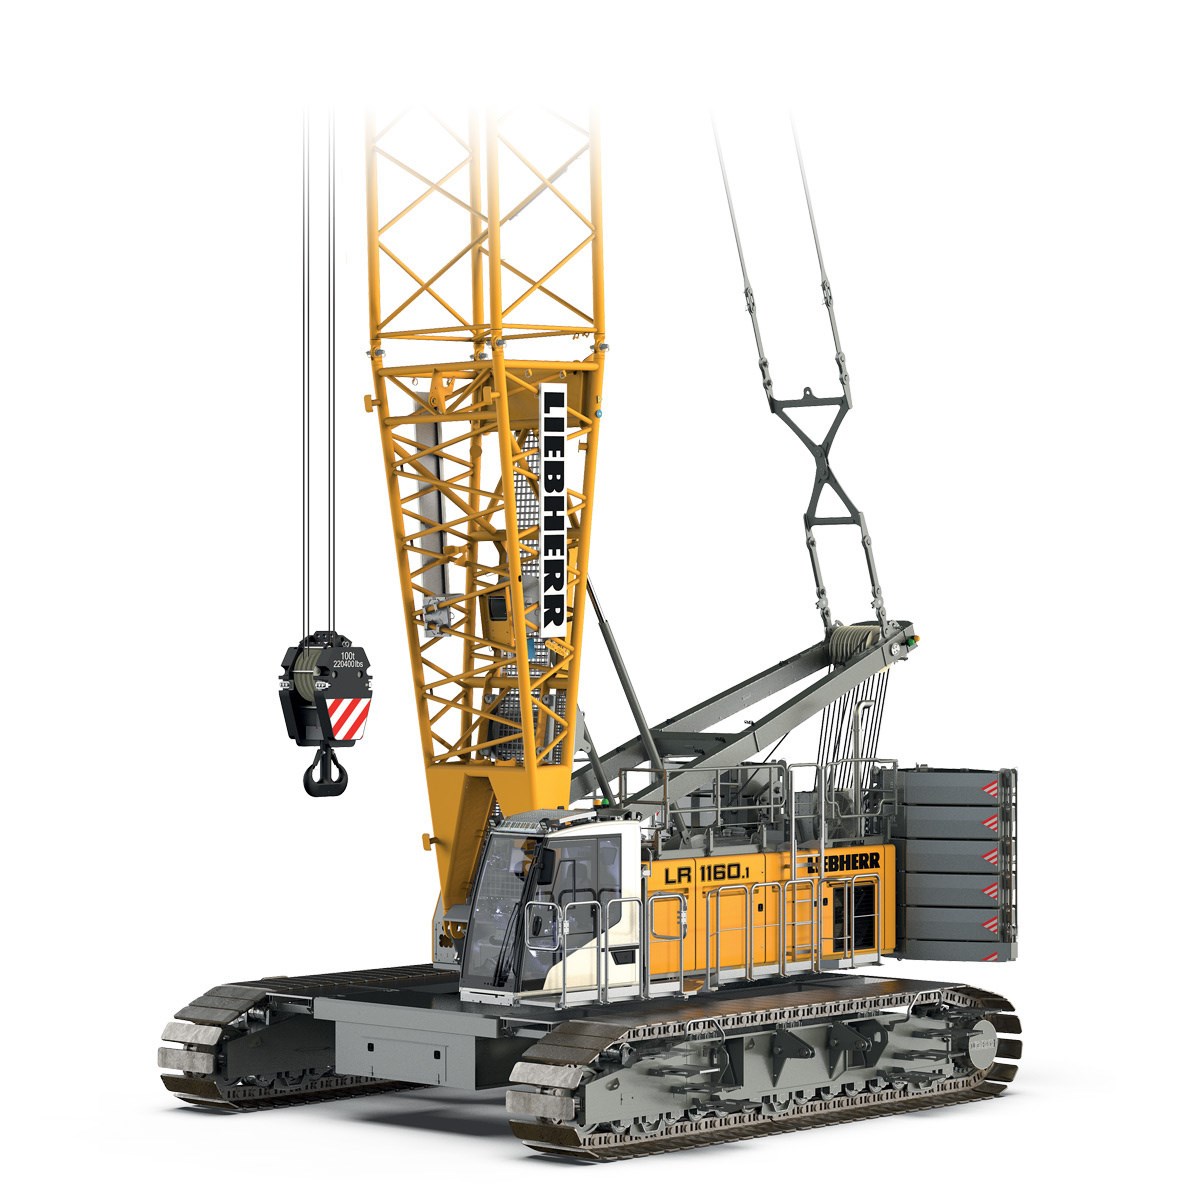 Liebherr LR 1130 Crane Overview and Specifications